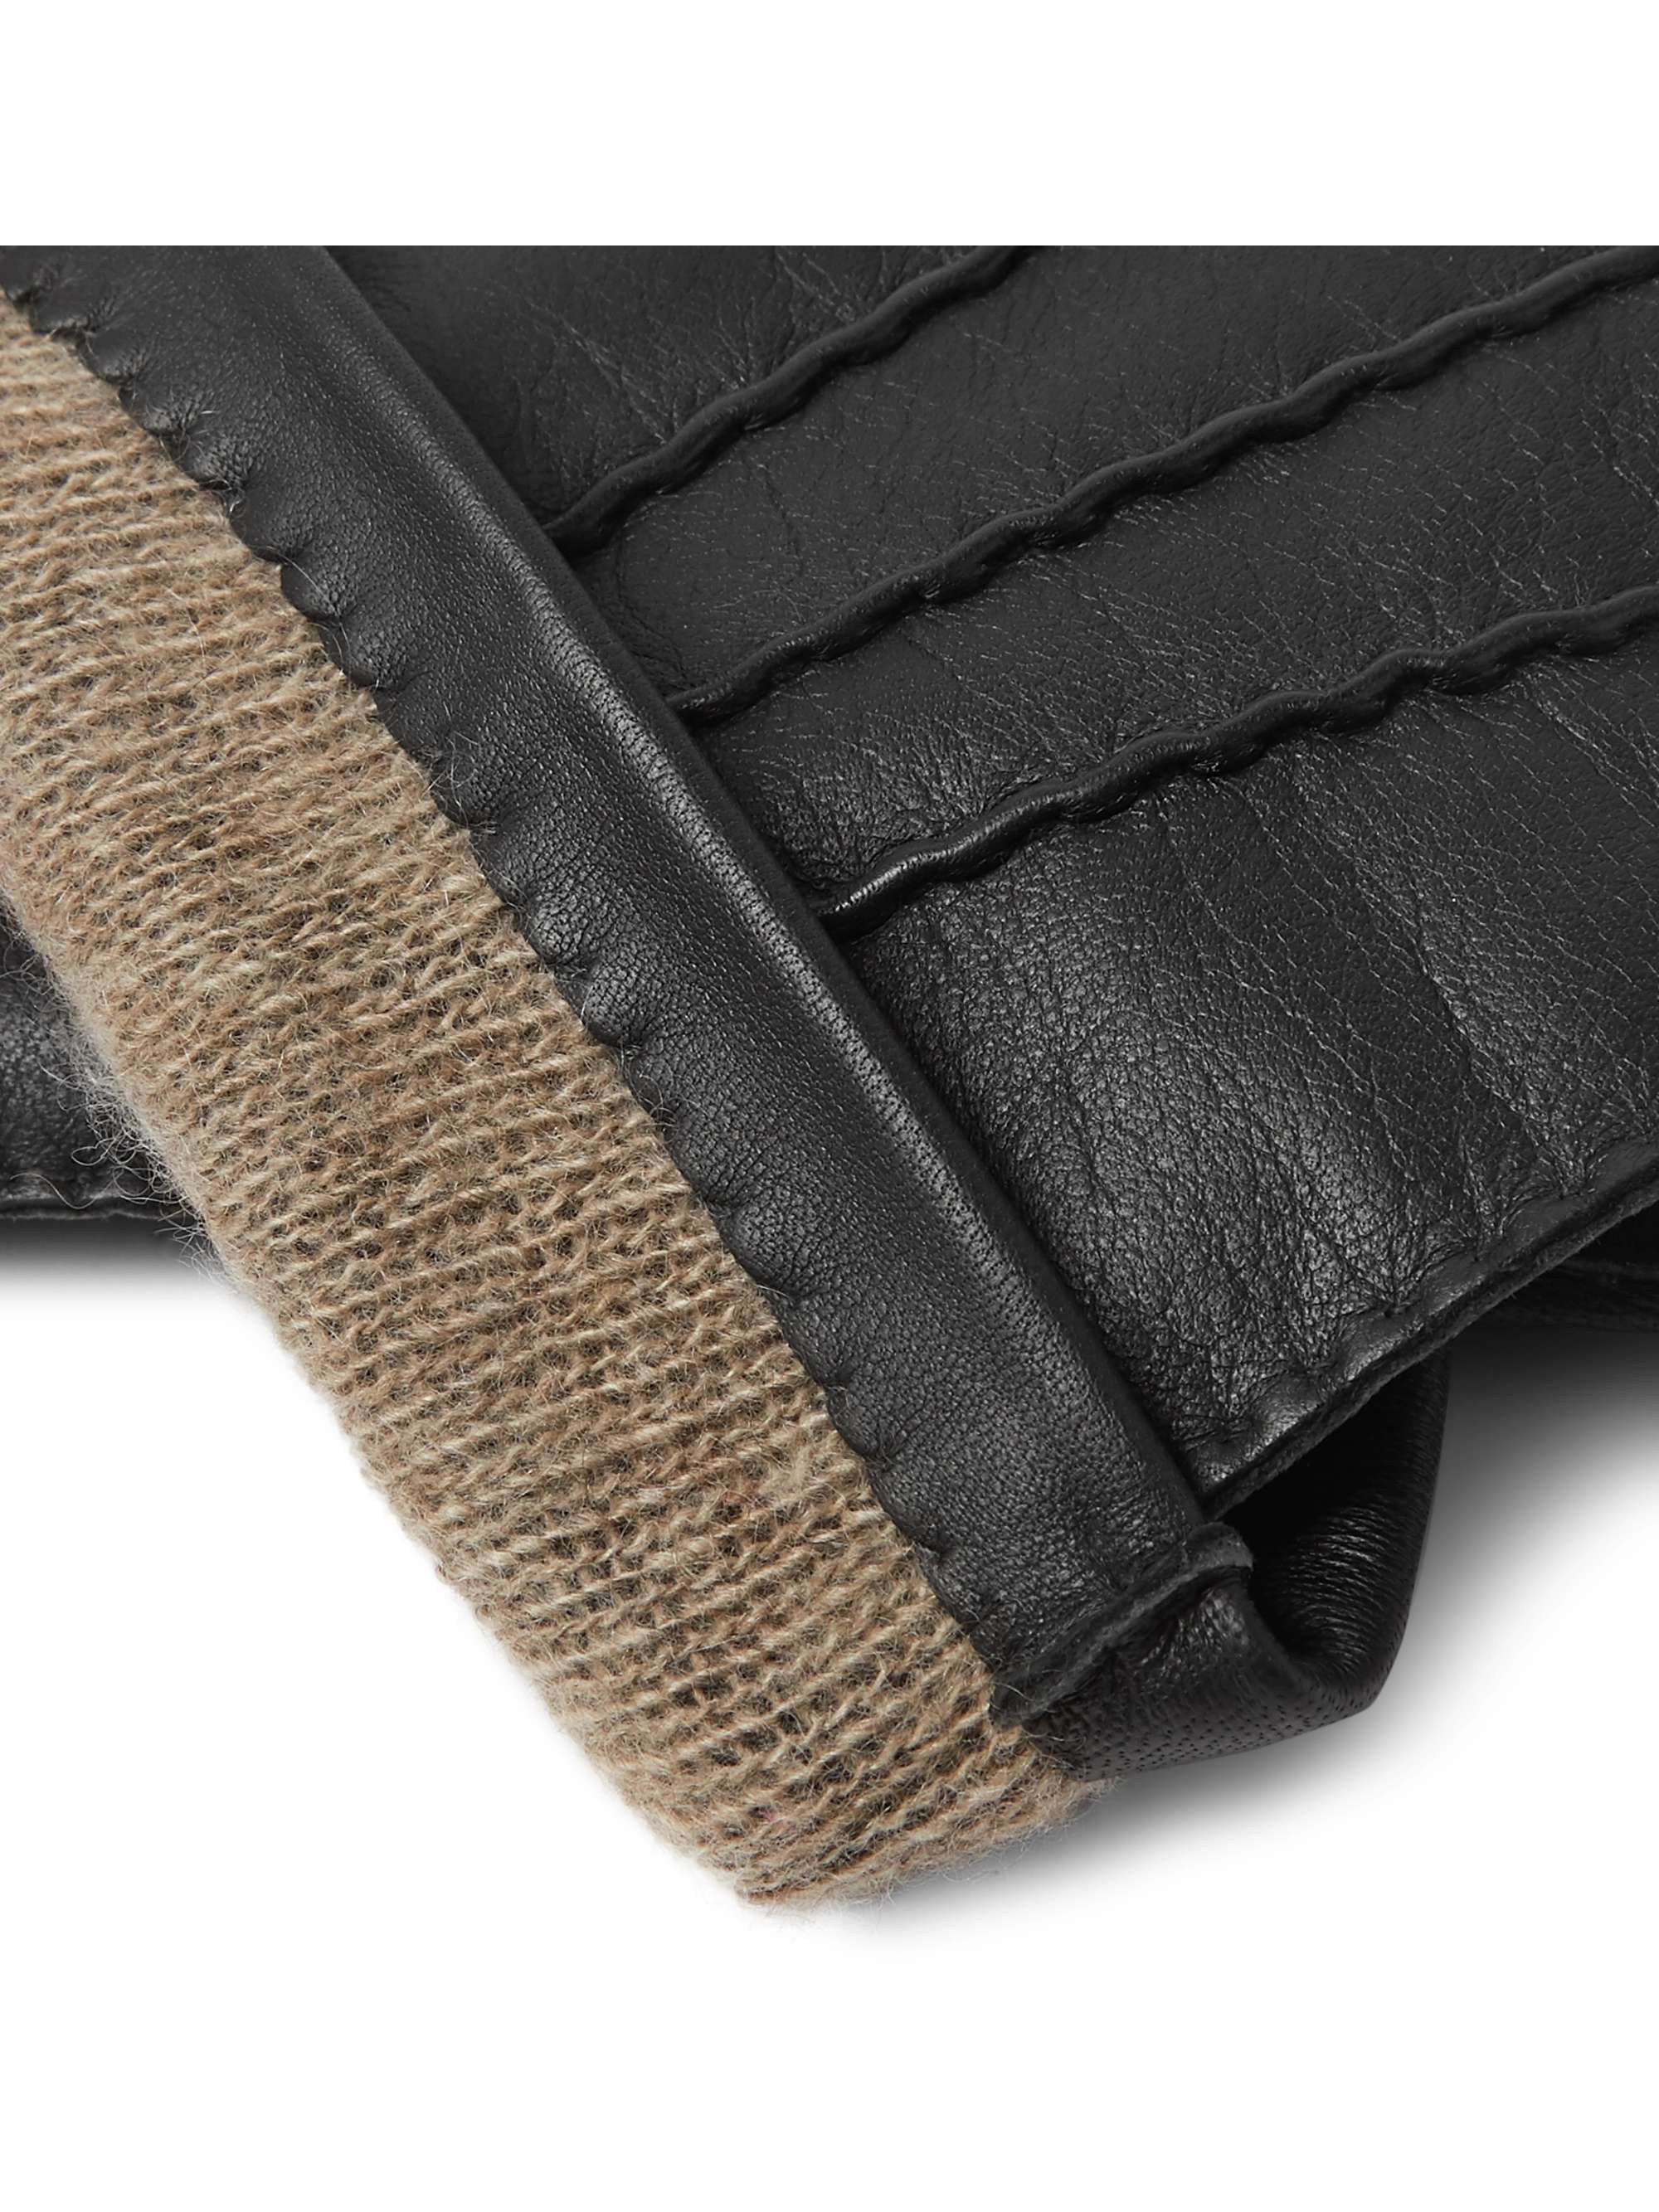 DENTS Shaftesbury Touchscreen Cashmere-Lined Leather Gloves